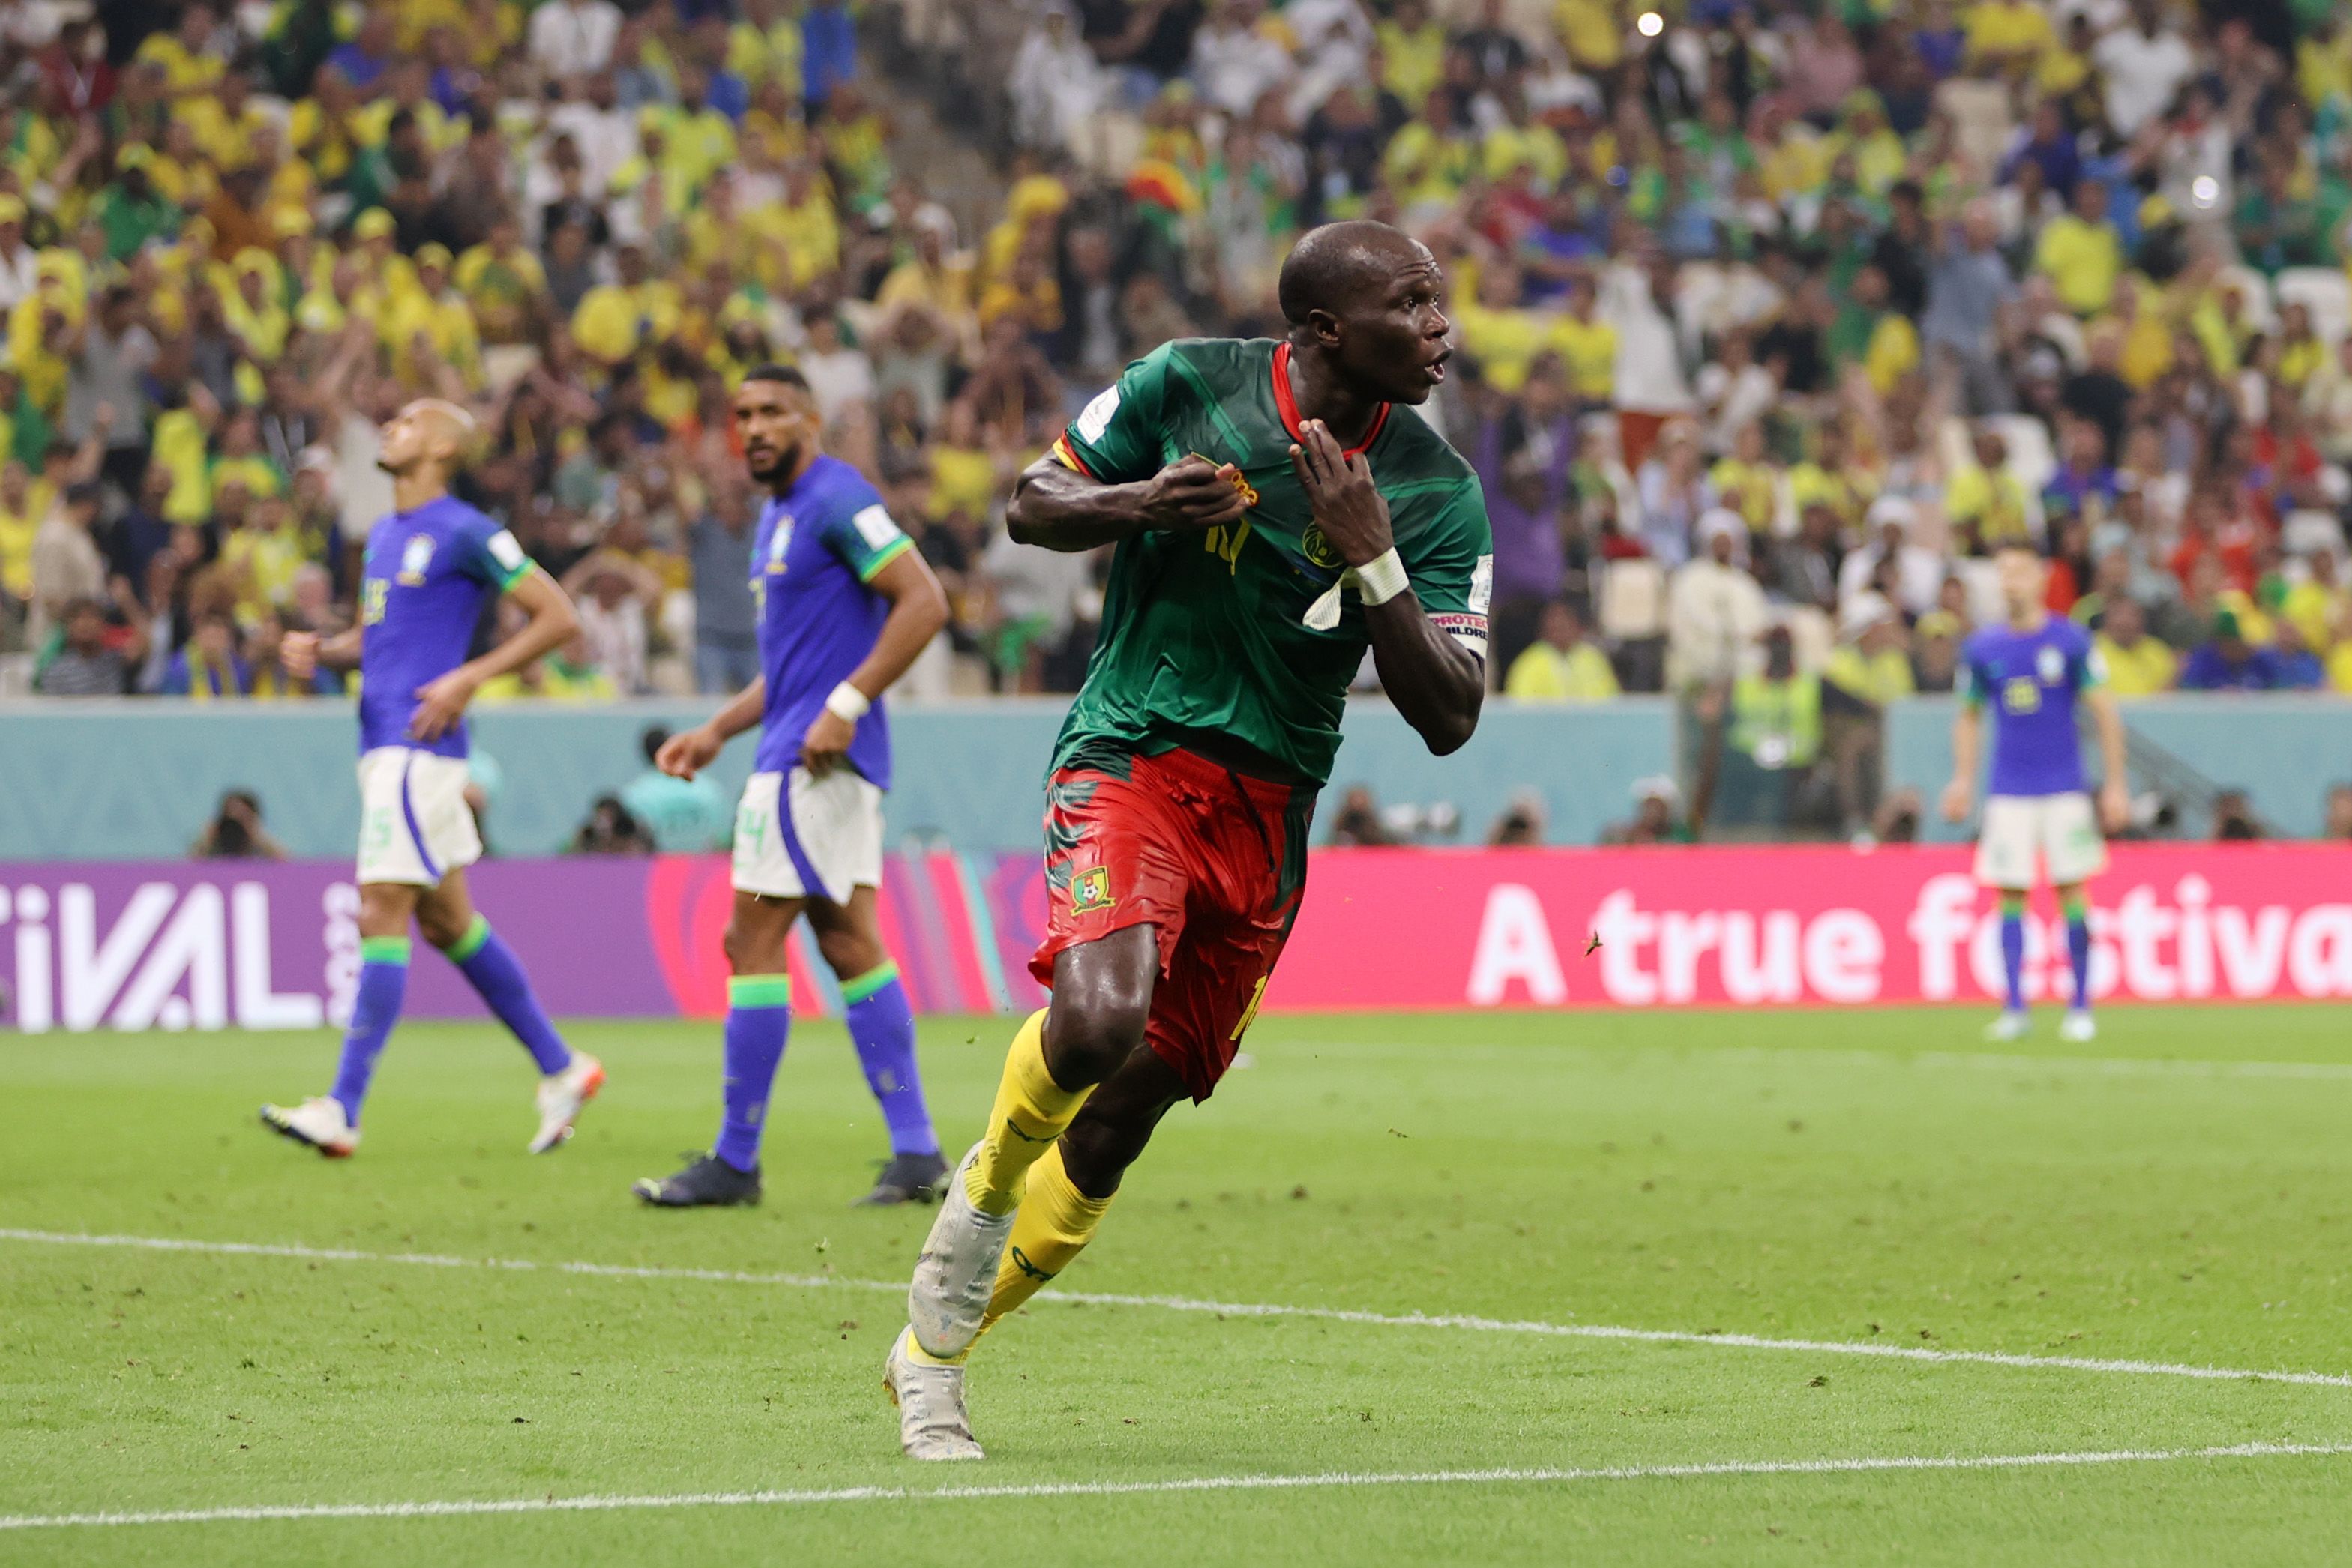 2022 World Cup: Cameroon's Squad and Team Profile